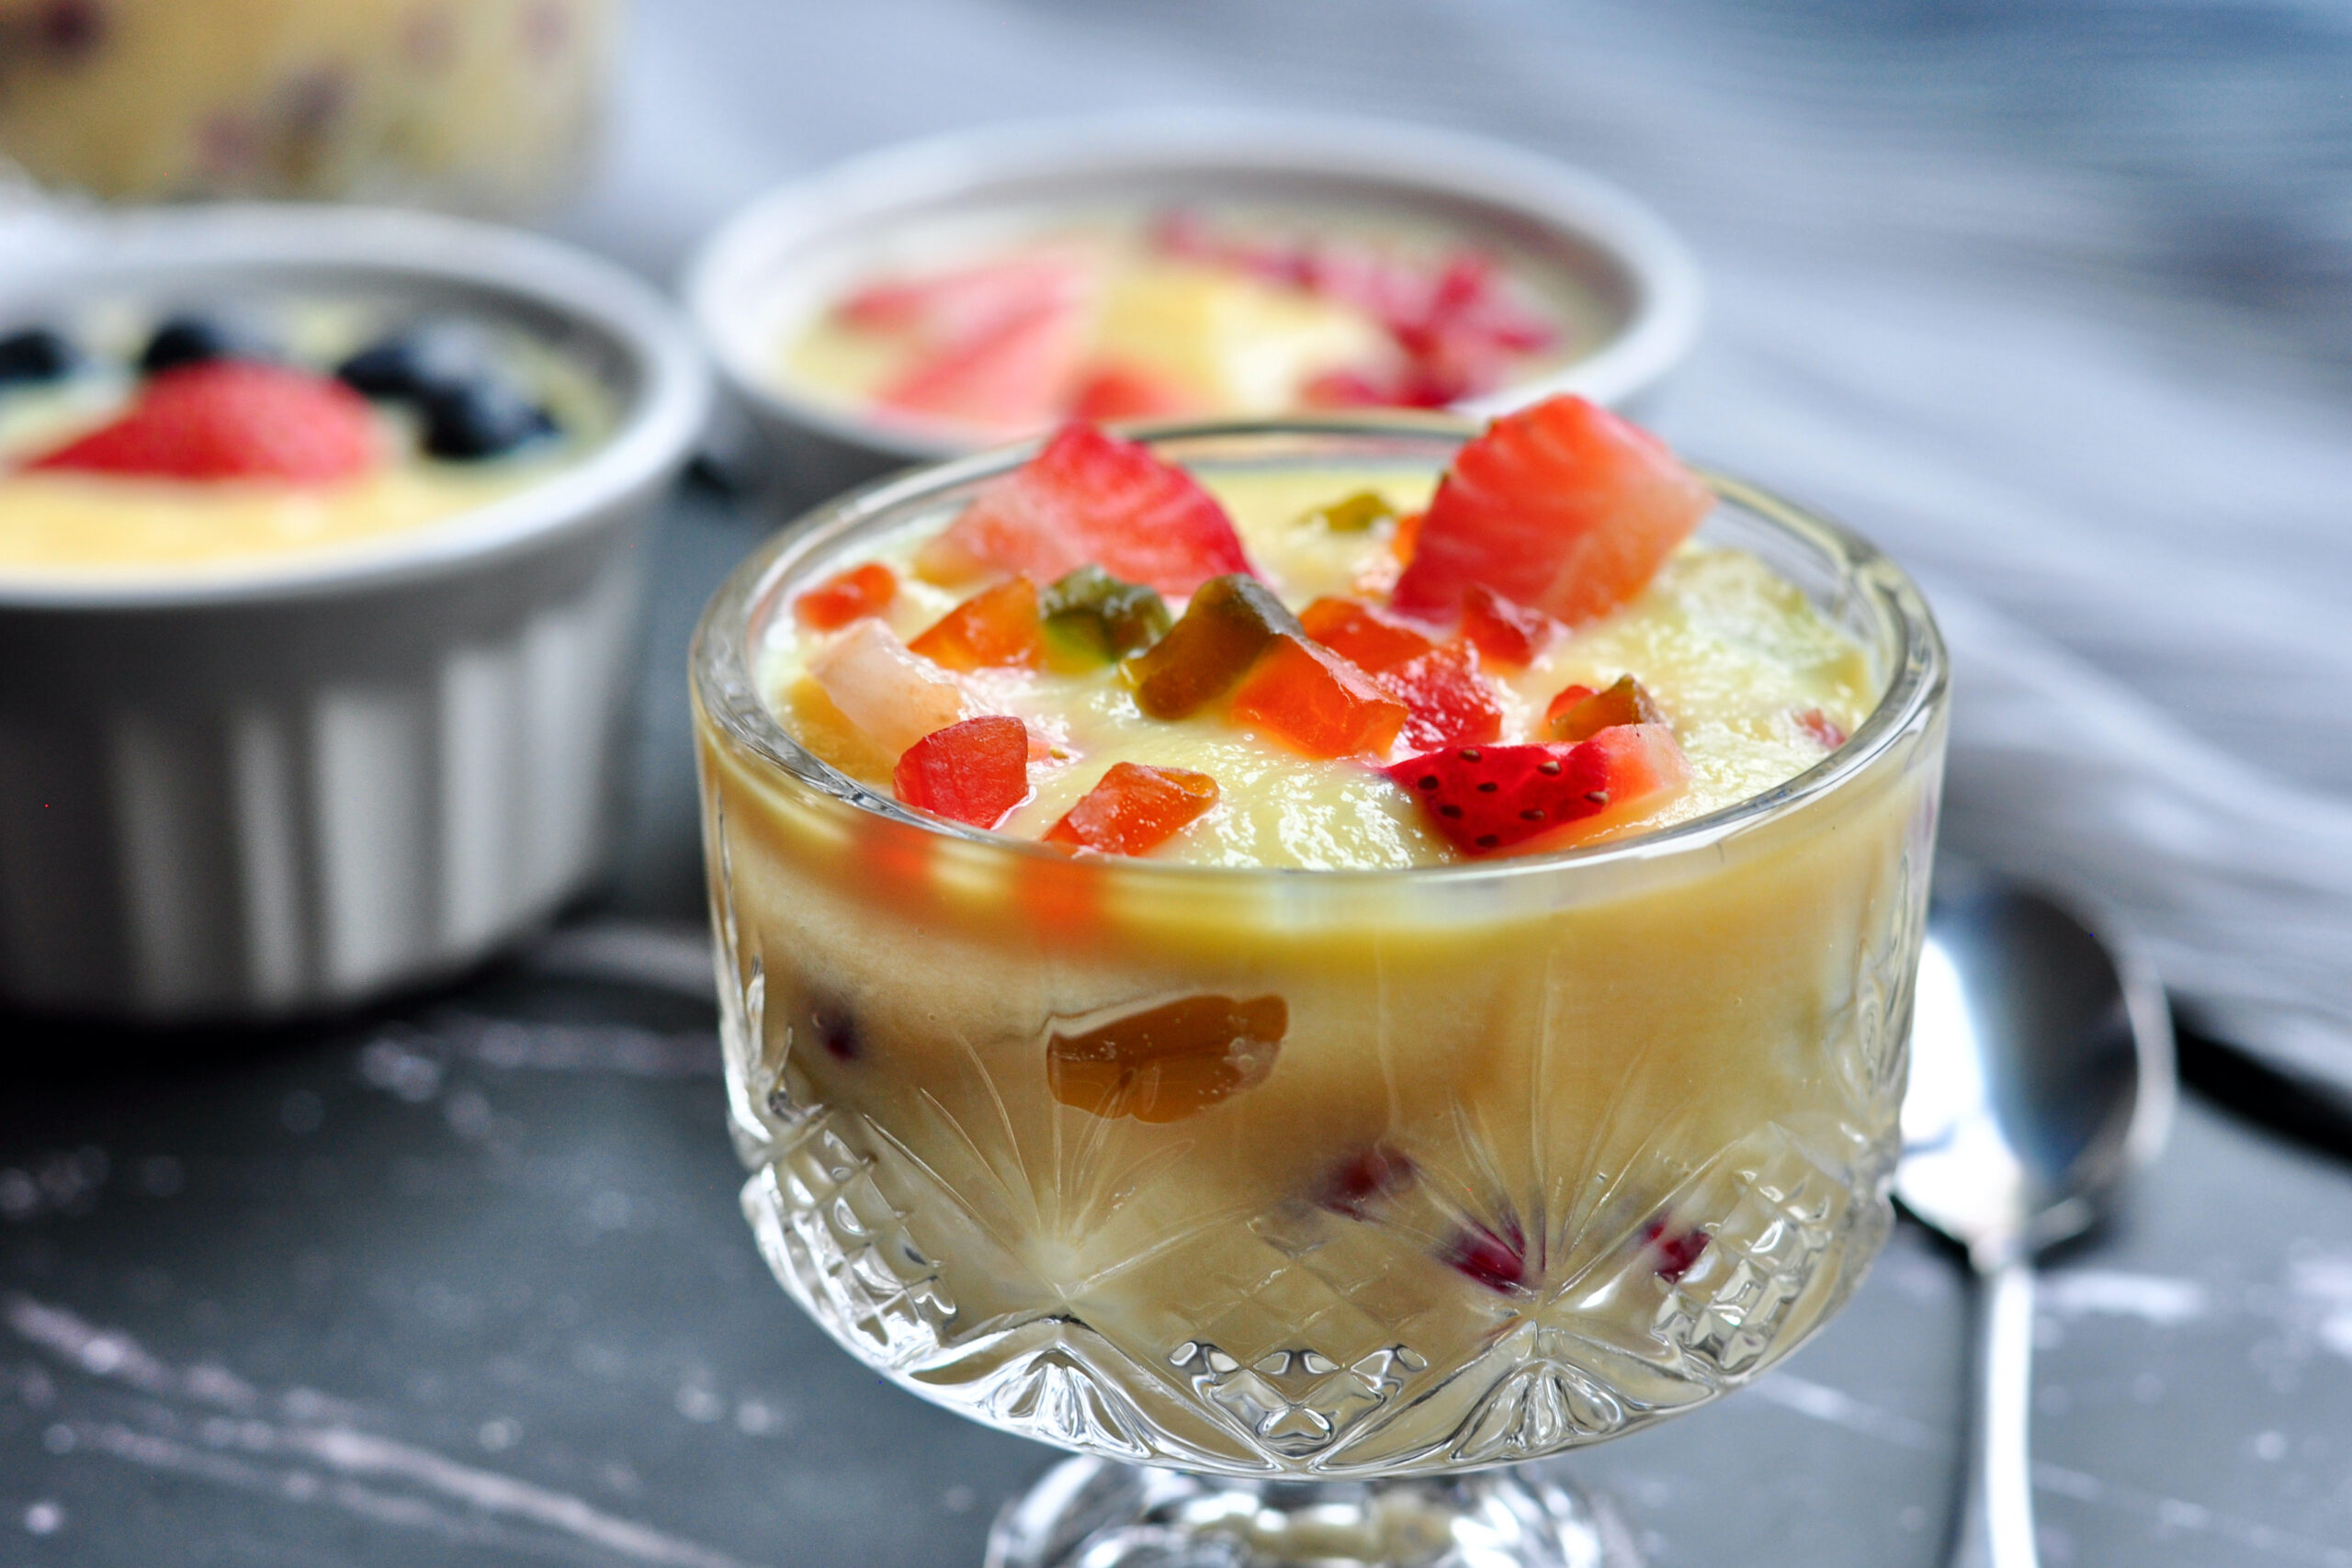 indian custard in a bowl with fruits.